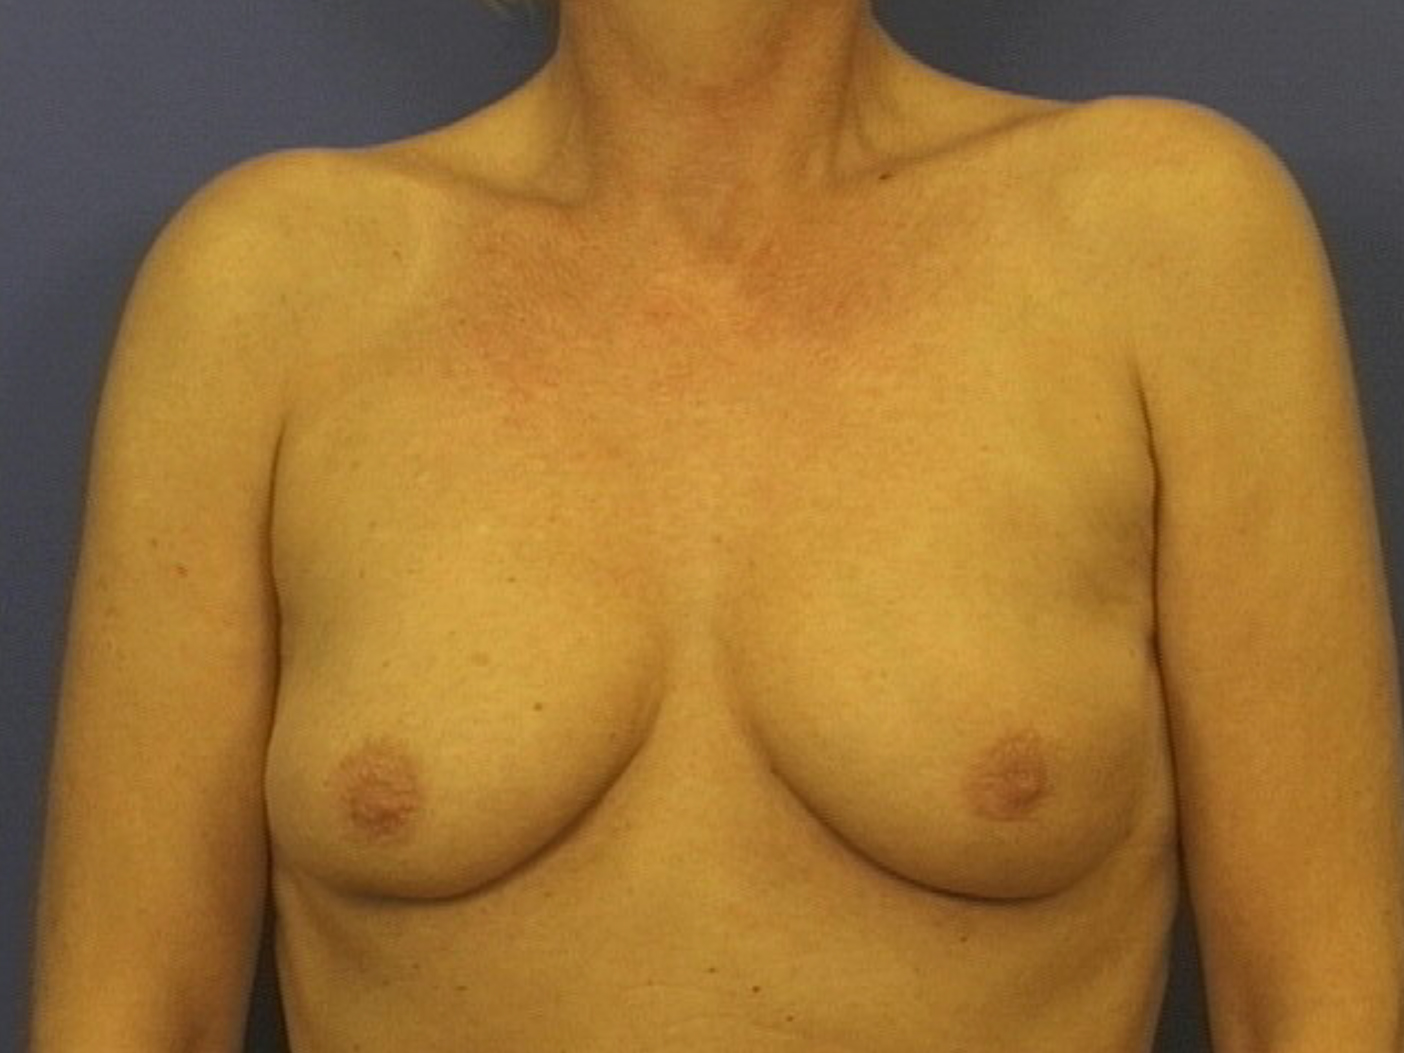 Breast-conserving surgery and radiotherapy